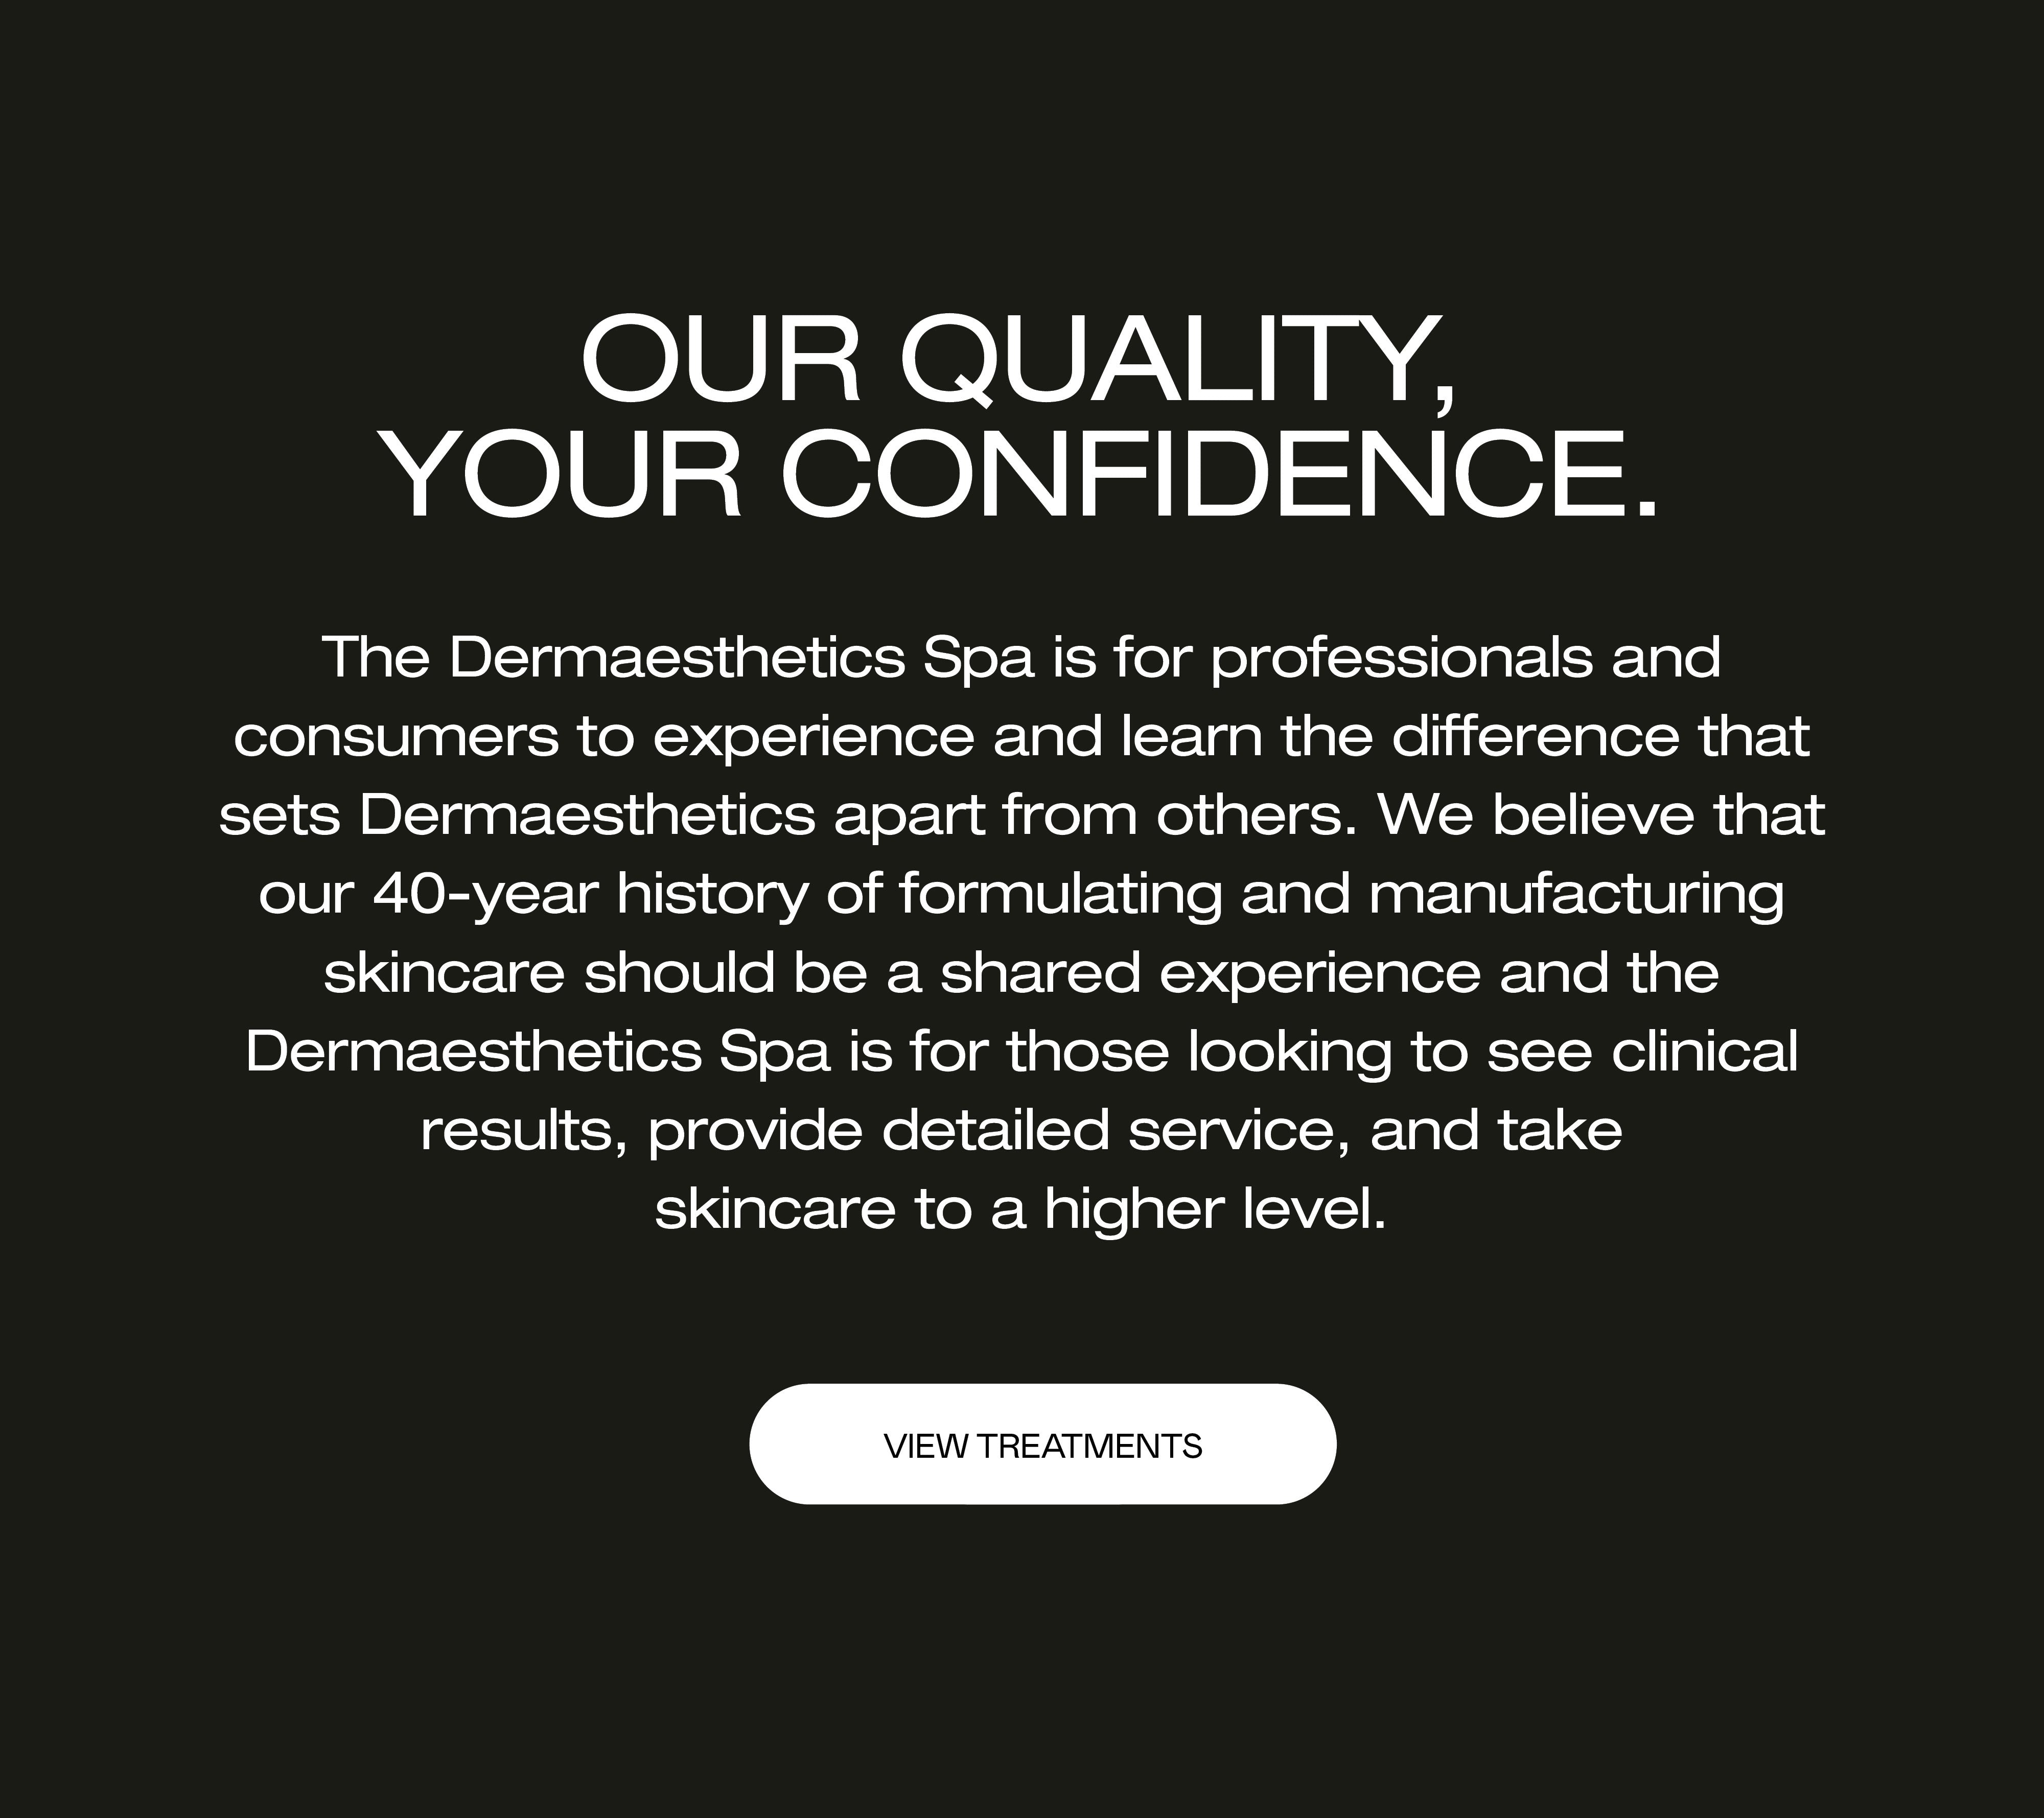 The Dermaesthetics Spa is for professionals and consumers to experience and learn the difference that sets Dermaesthetics apart.